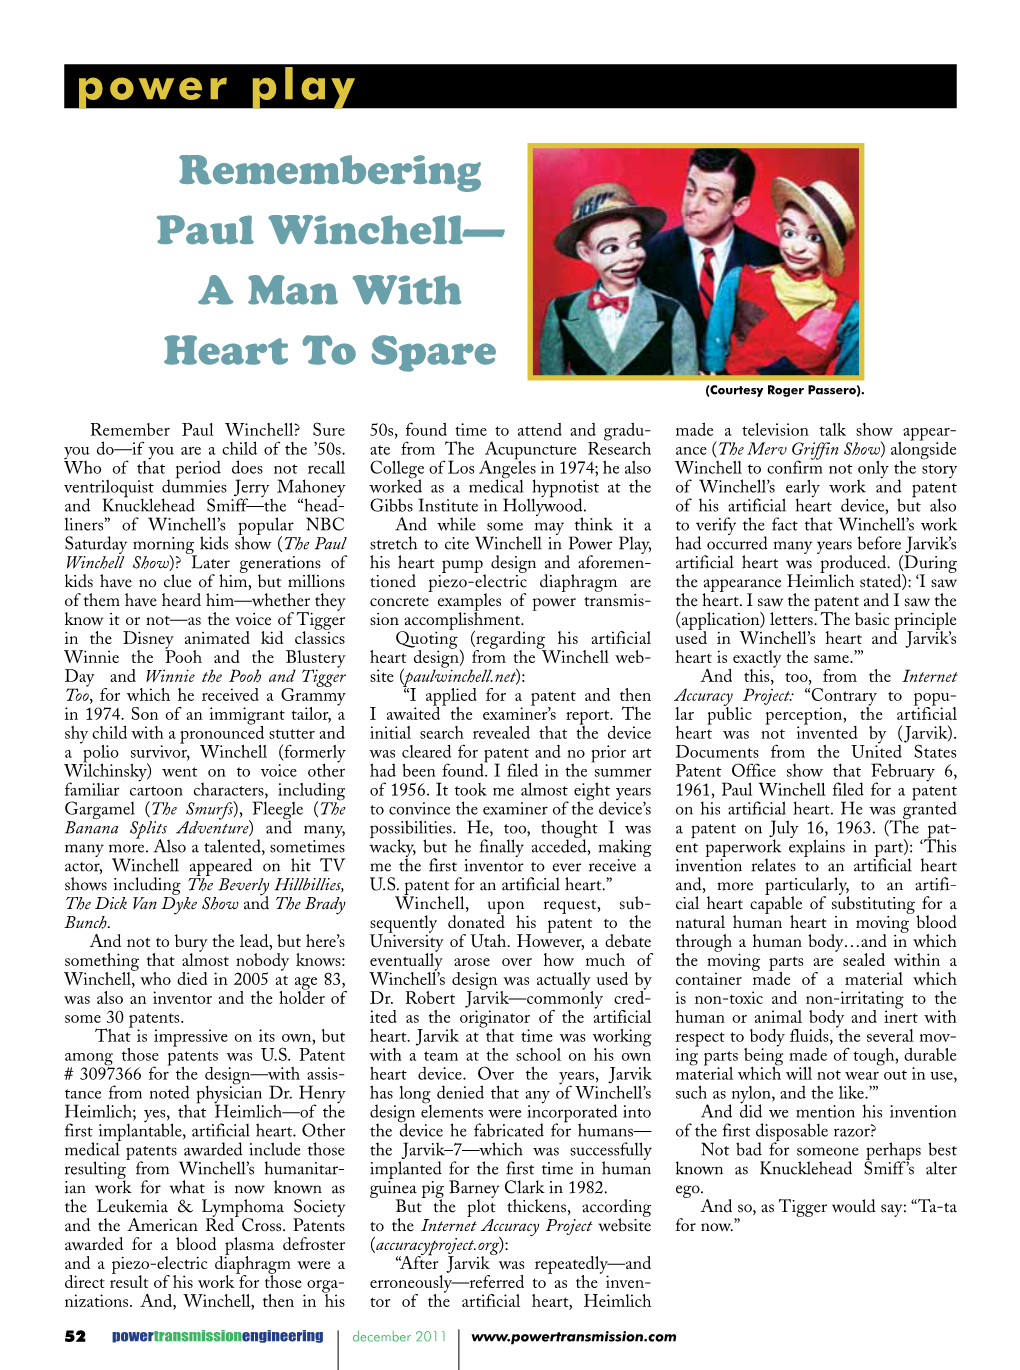 Remembering Paul Winchell— a Man with Heart to Spare (Courtesy Roger Passero)